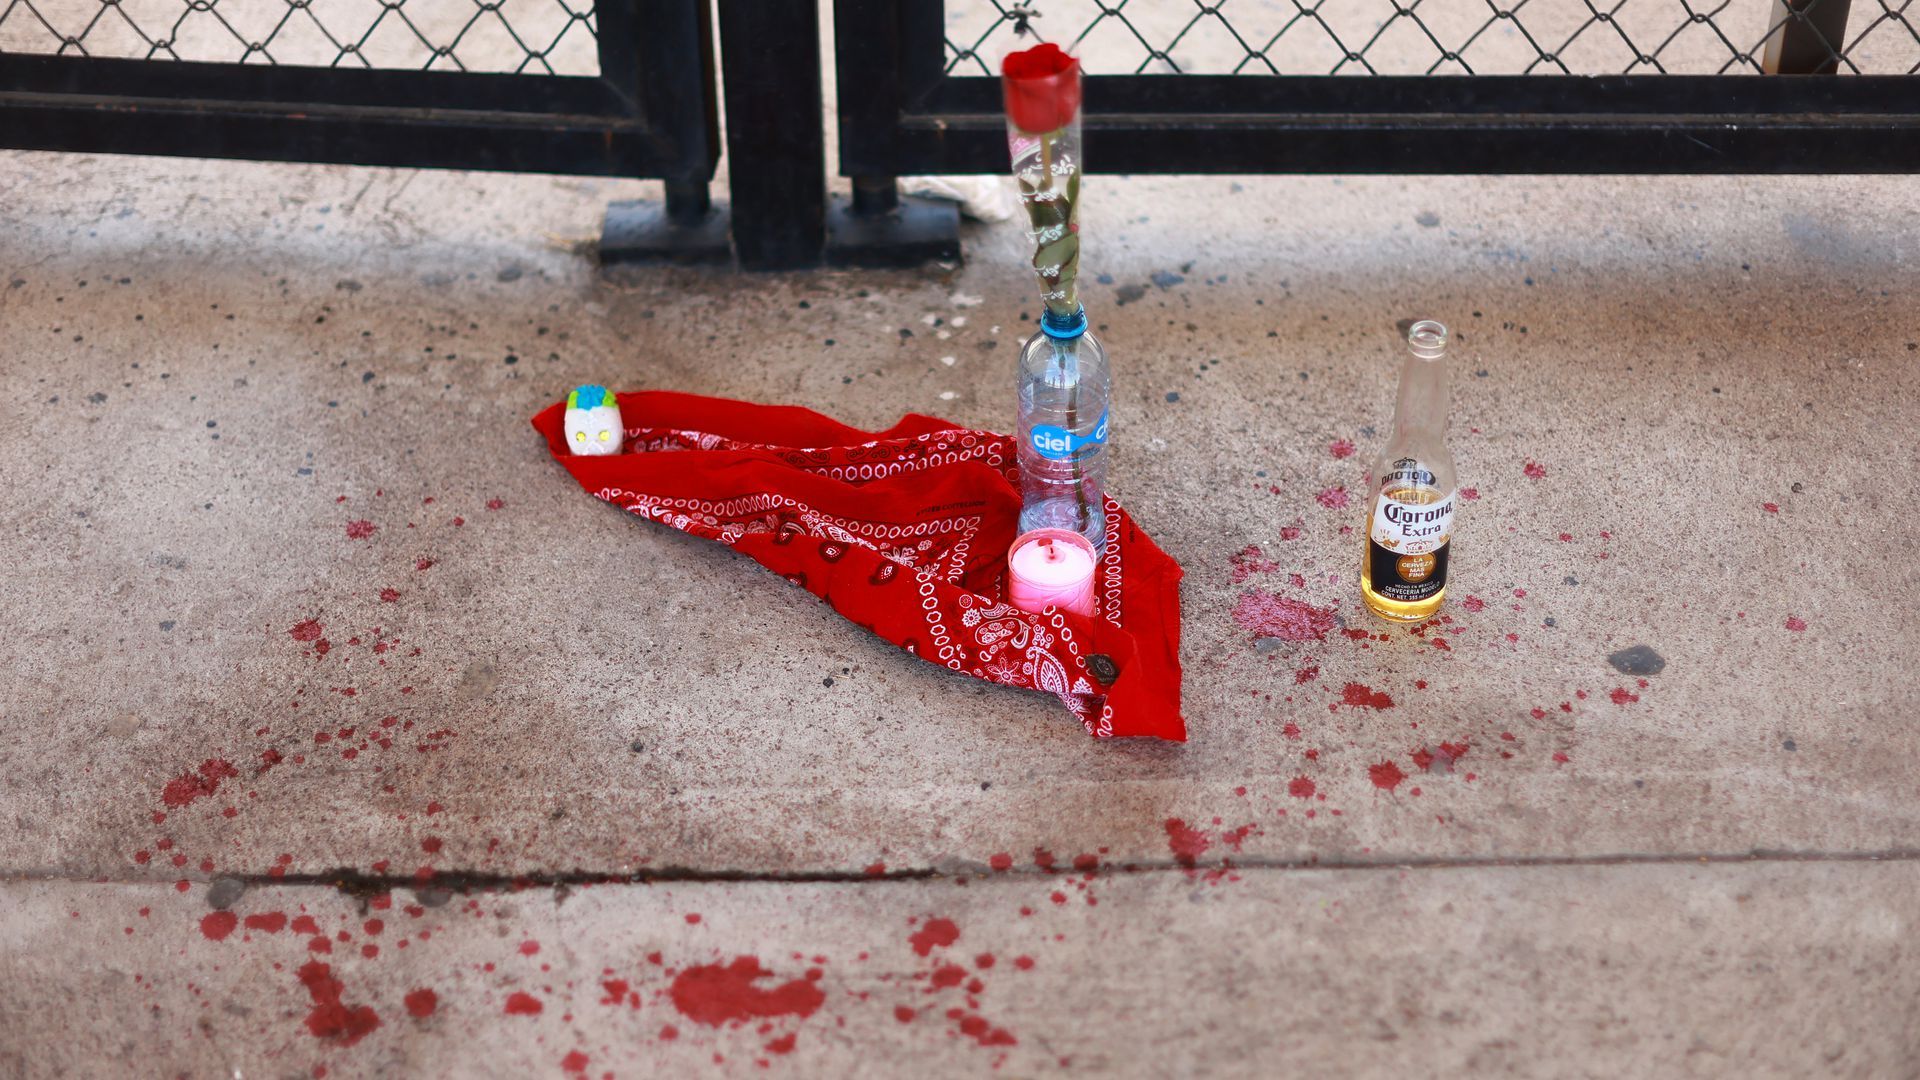 A flower and beer left as an altar near one of the entrances to Estadio Corregidora.